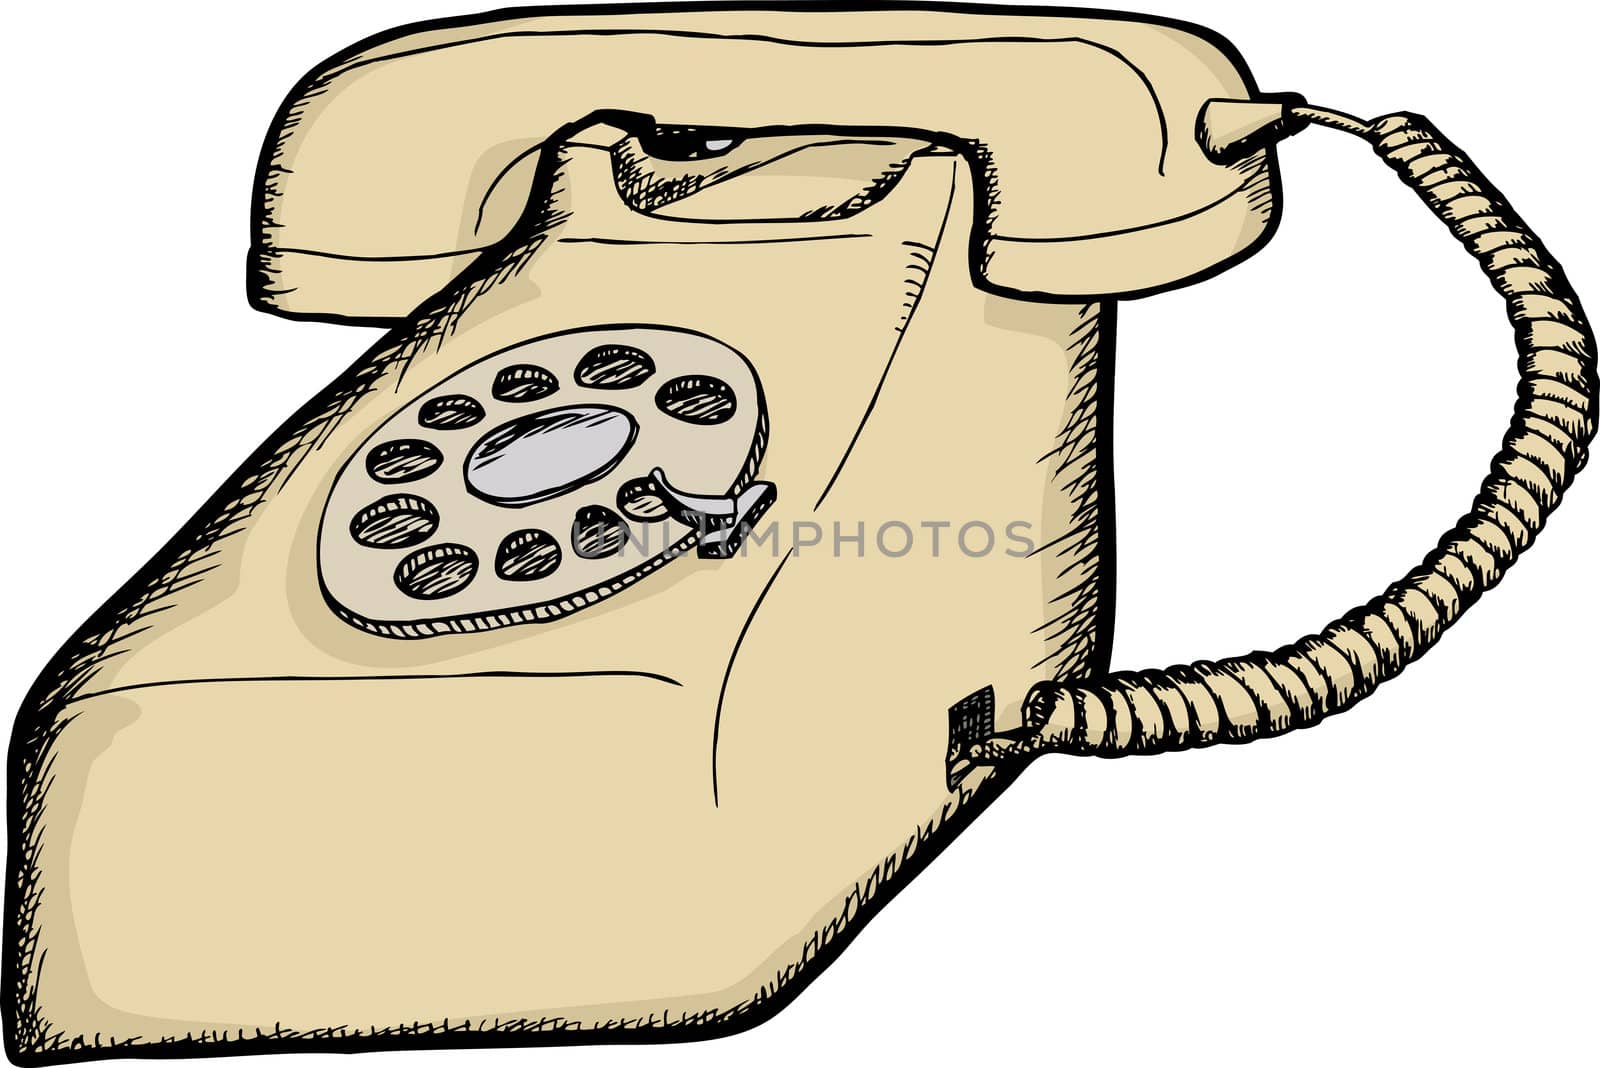 Beige desktop rotary telephone sketch isolated over white background